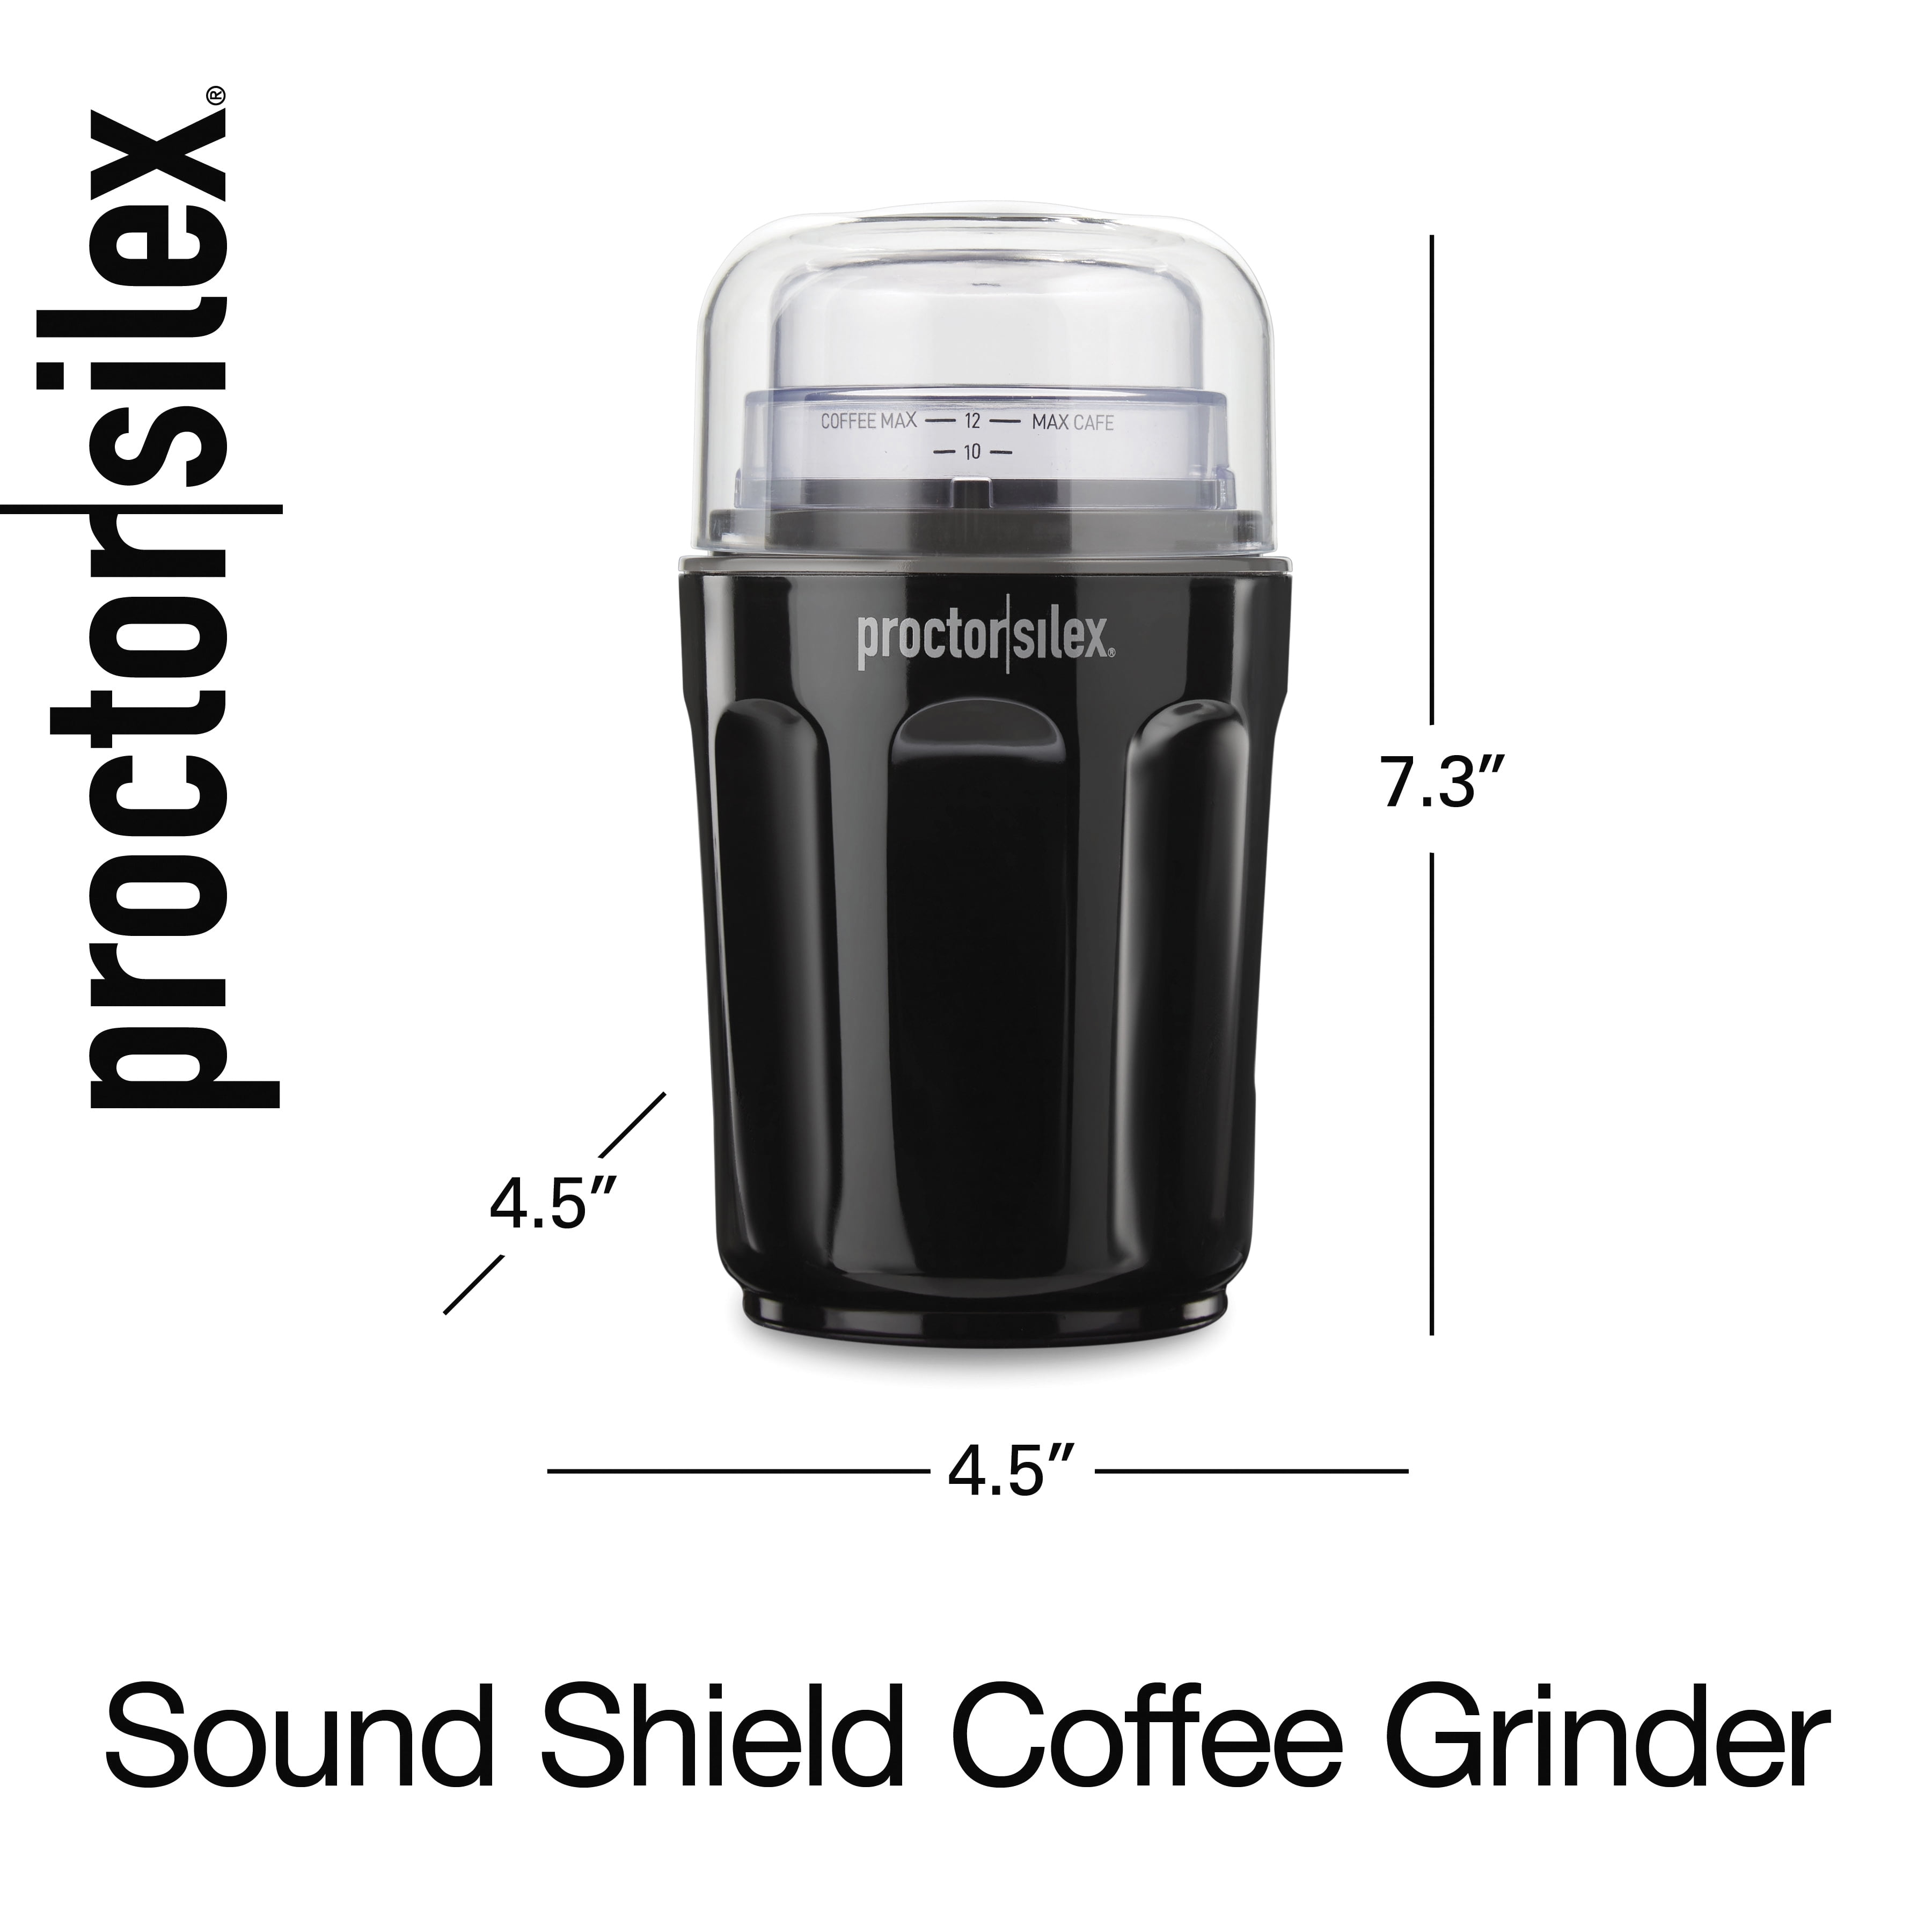 Proctor Silex Sound Shield Coffee Grinder, Sound Shield Technology, Grinds  for Brewing 12 Cups, 80402